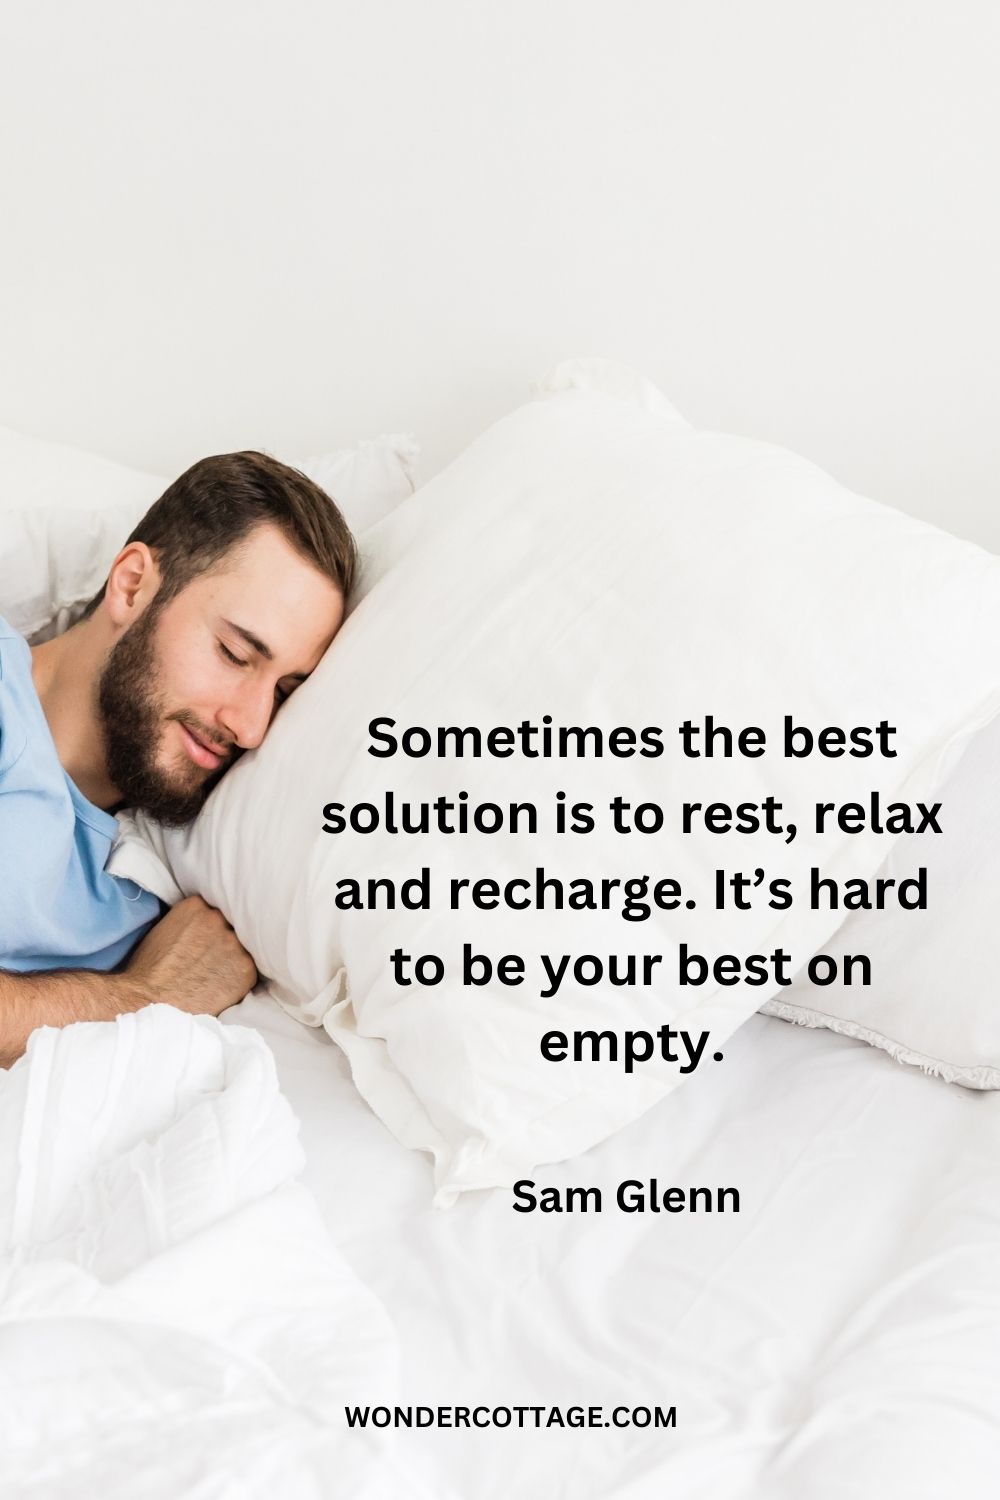 Sometimes the best solution is to rest, relax and recharge. It’s hard to be your best on empty. Sam Glenn